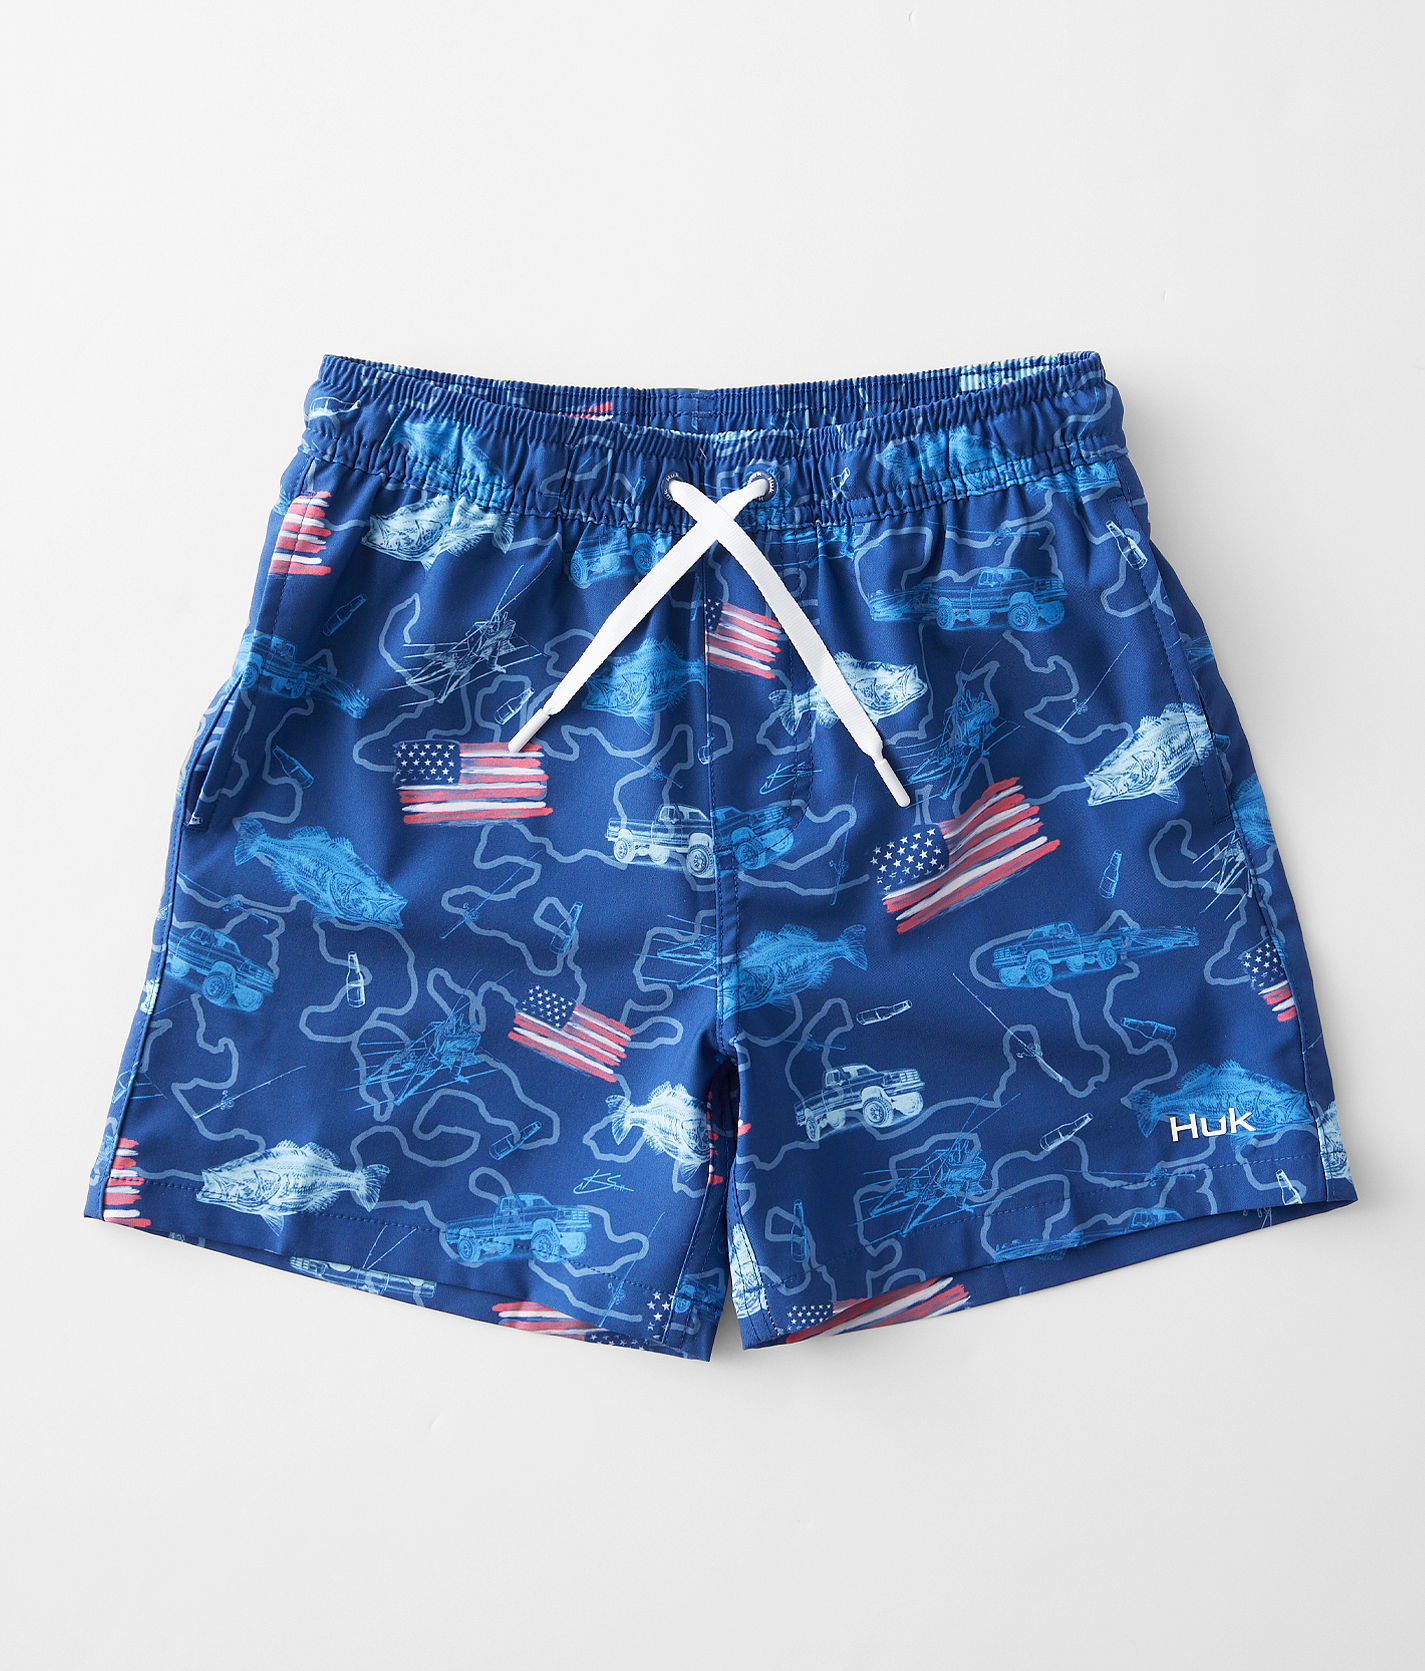 Huk Youth Pursuit Volley Swim Shorts - Fish and Flags Set Sail